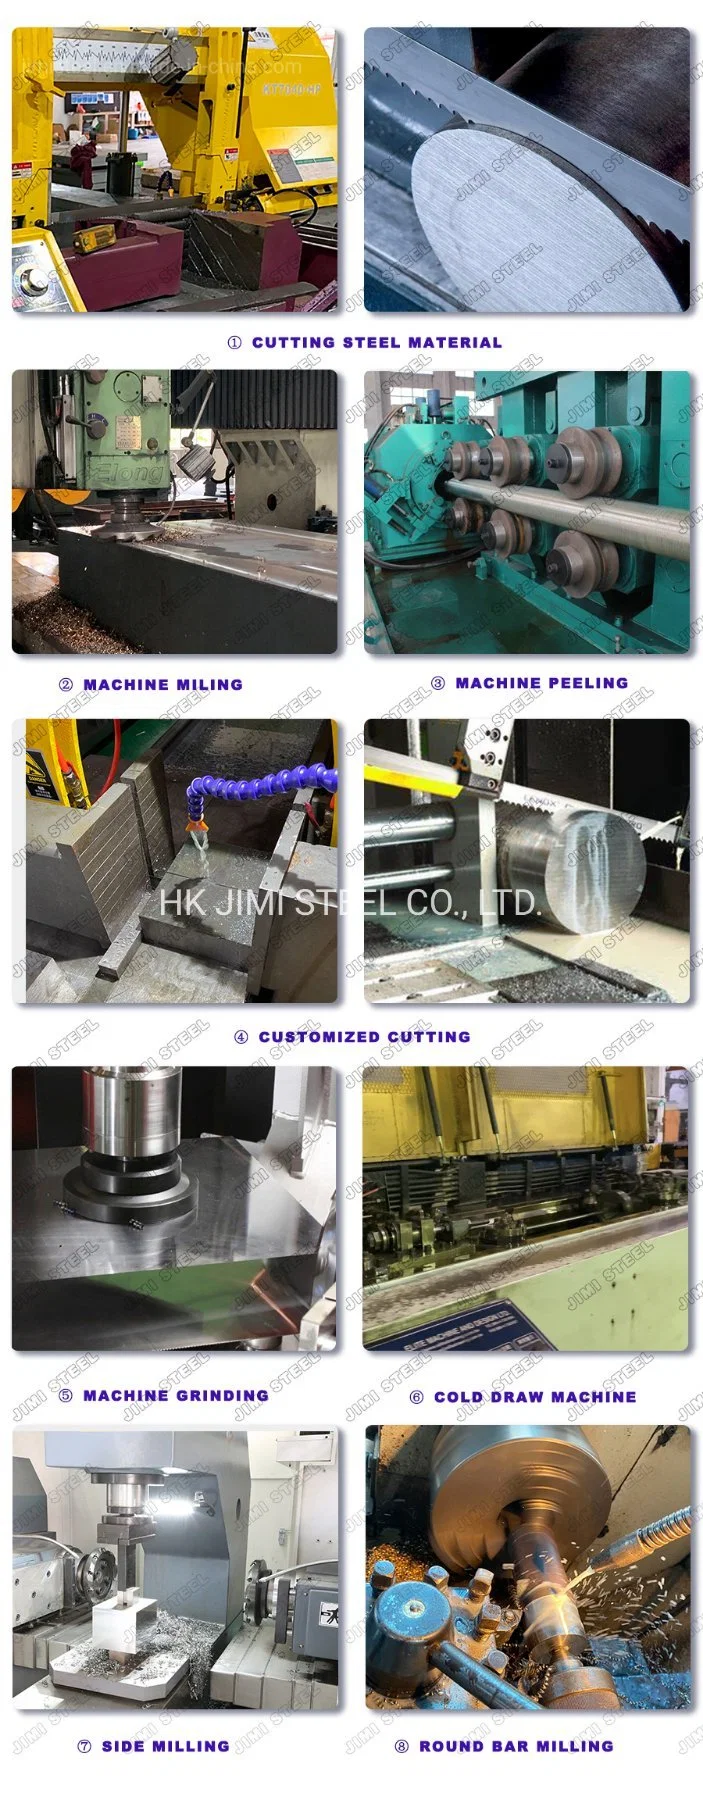 Tool Steel T1 AISI Ground Cold Work Mould Steel DIN 1.3355 JIS Skh2 Alloy High Speed Die Steel for Making Knife Steel Material